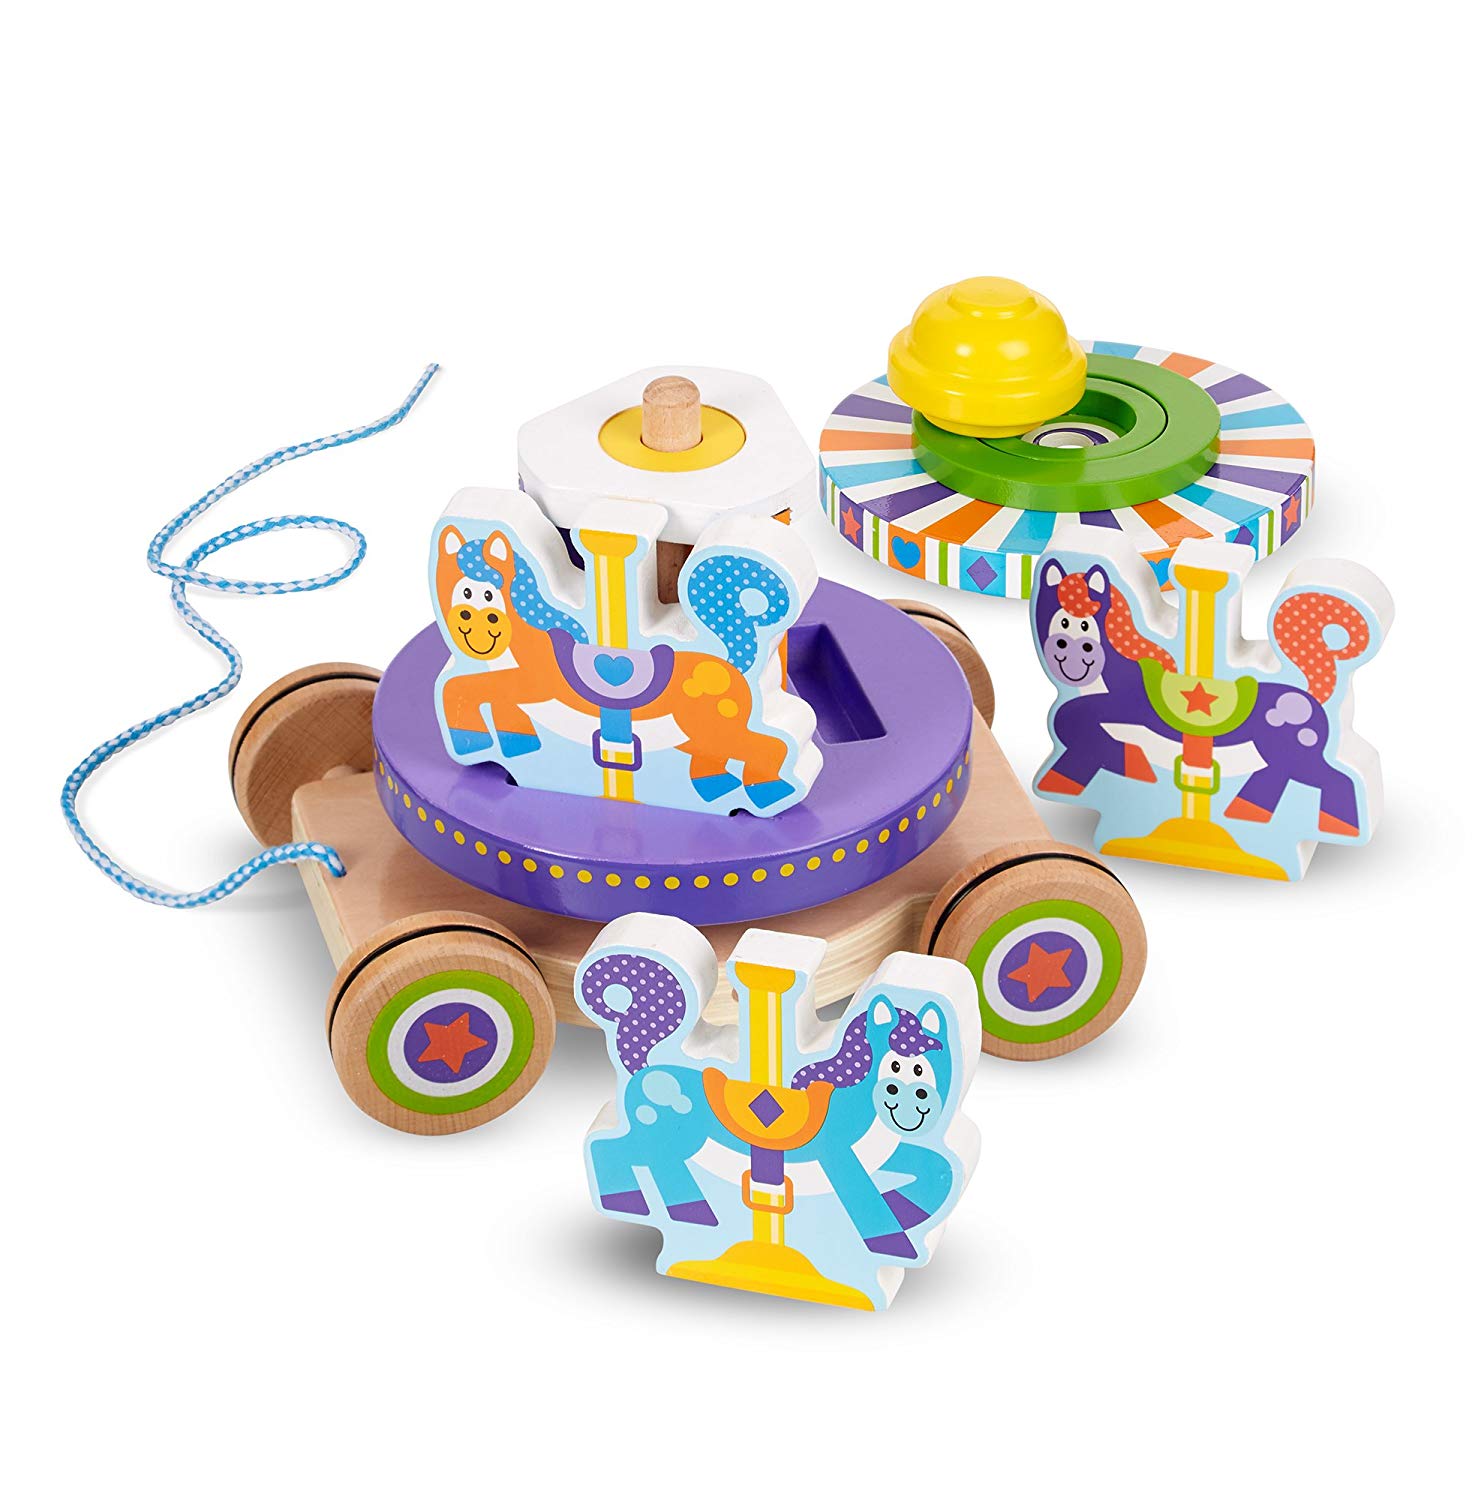 Melissa & Doug 13616 Spinning Carousel Pull Toy With Removable Pieces Class